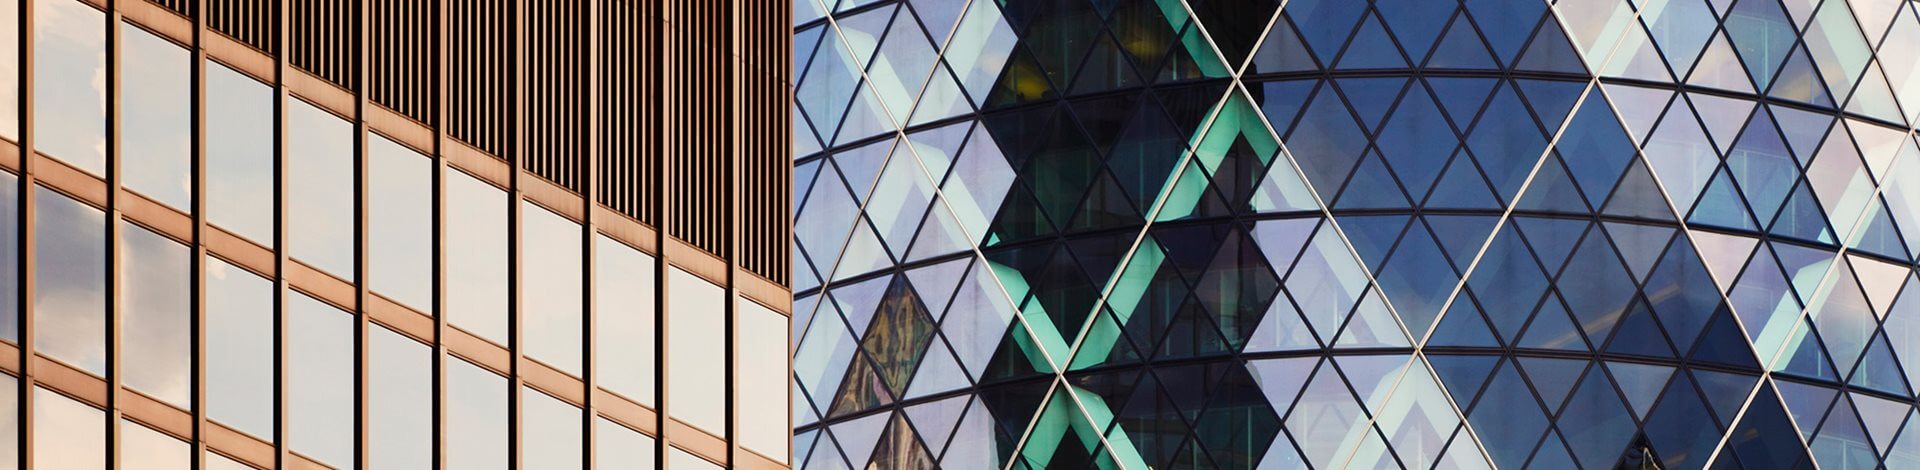 Close-up of the Gherkin in London